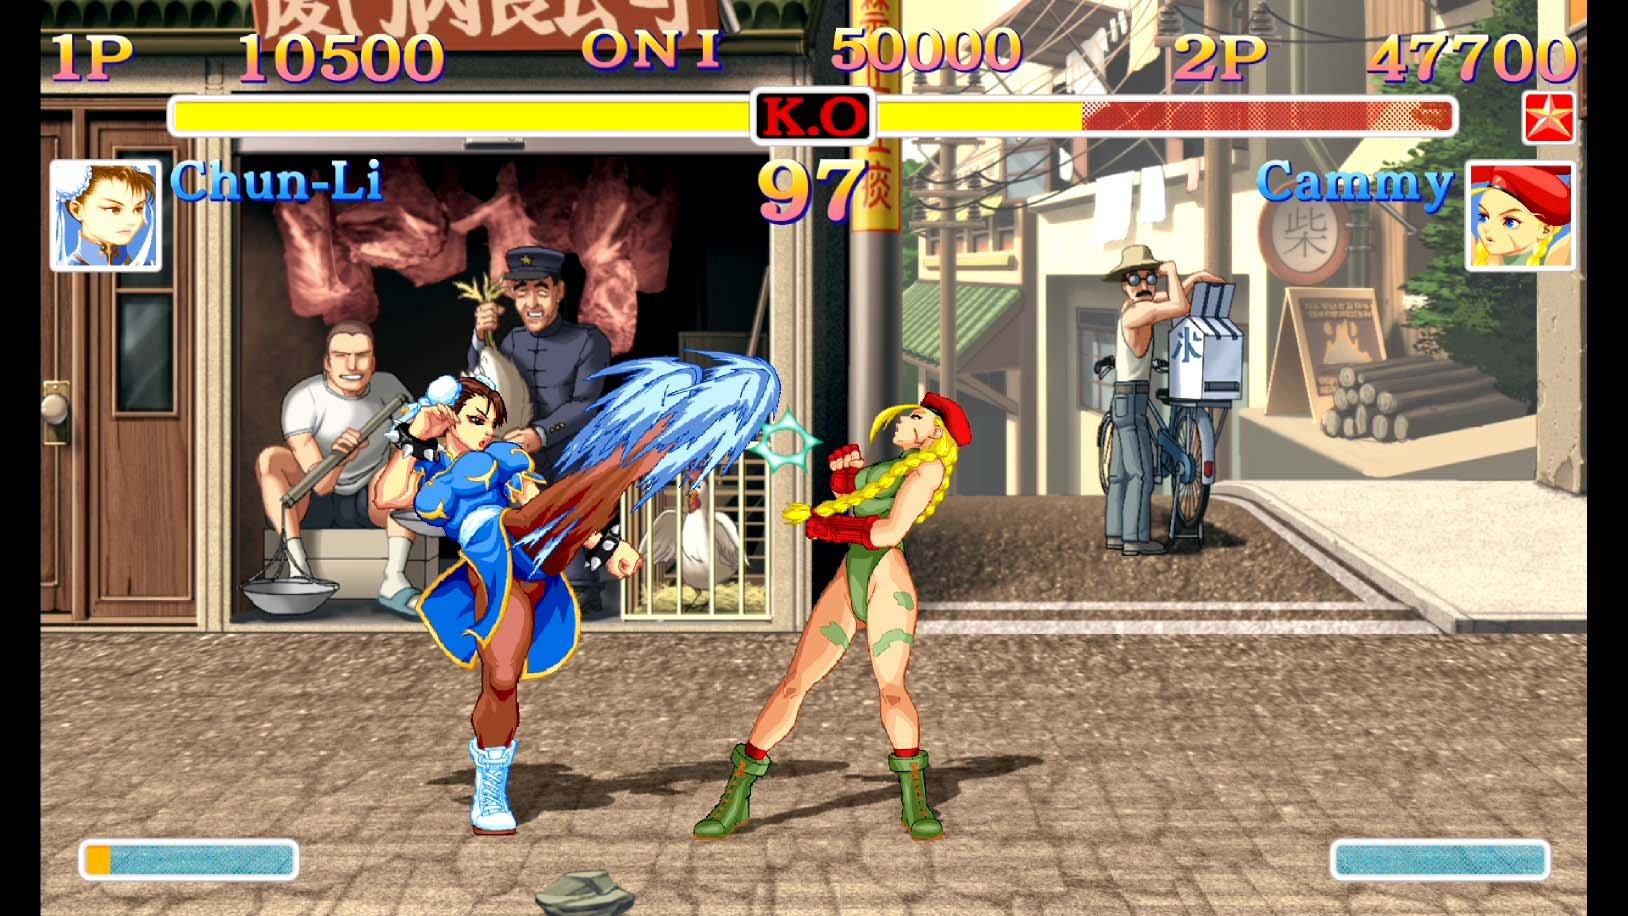 Ultra Street Fighter 2 is coming to Switch, features two new